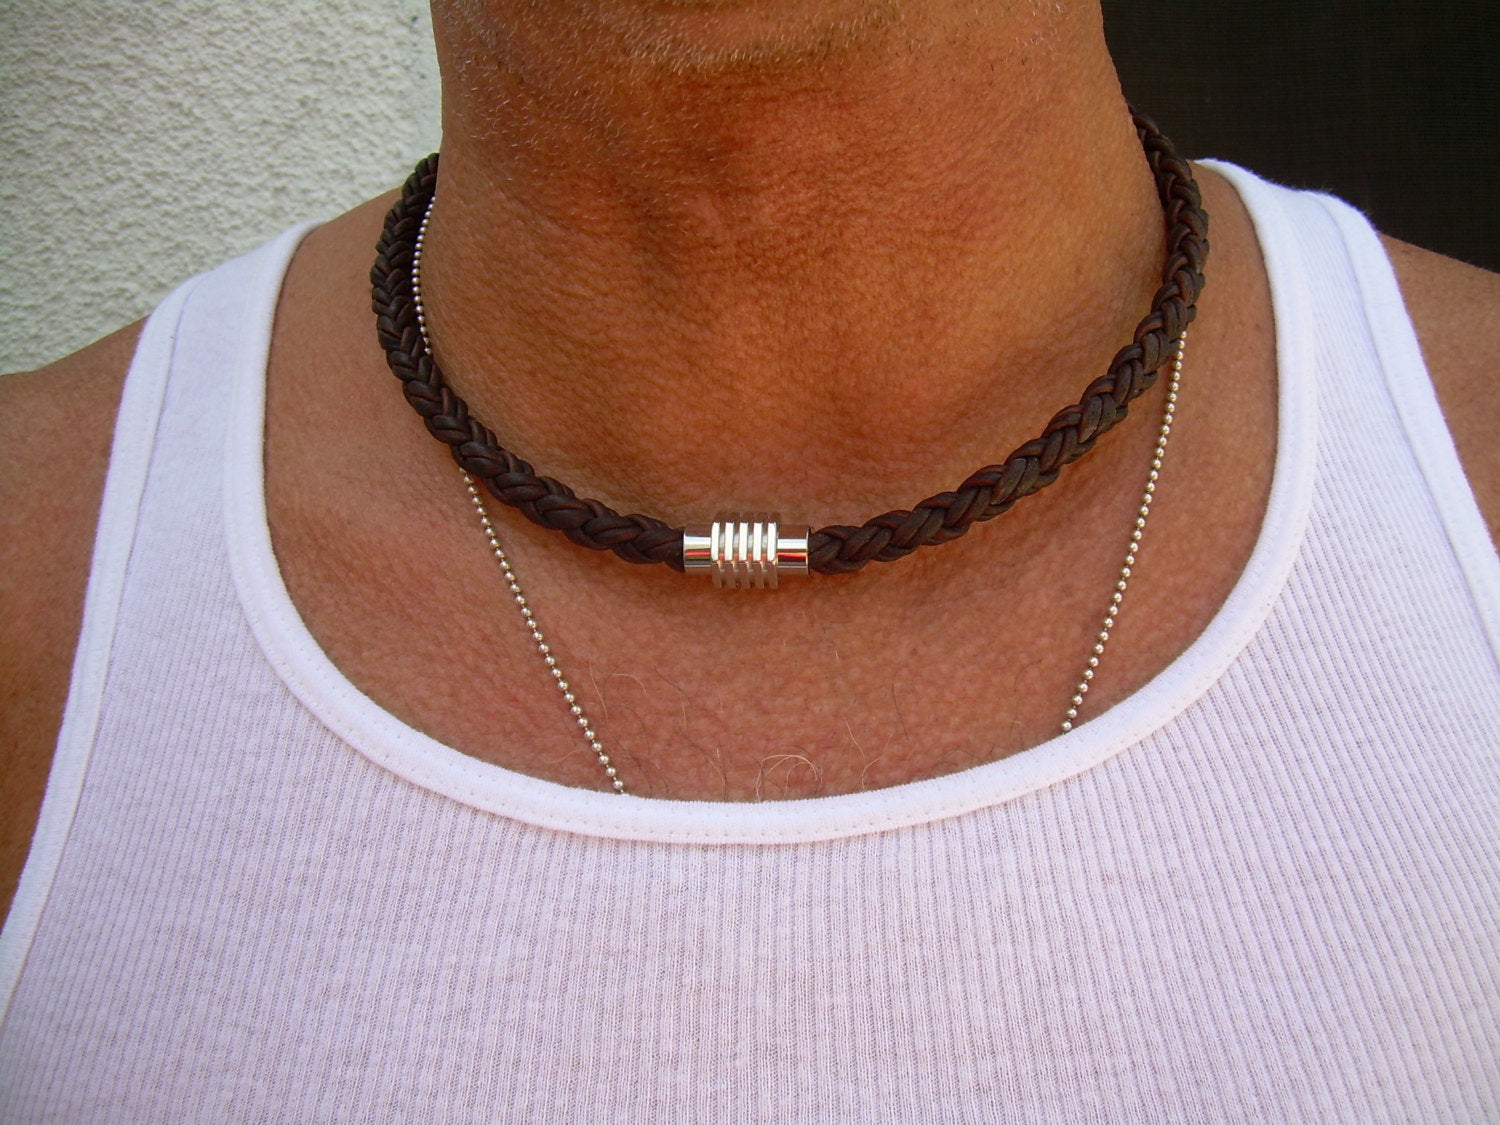 Men's Two Circle Necklace / Solid Sterling Silver / Rustic Hammer Forged  Nesting Circles / Adjustable Leather Cord